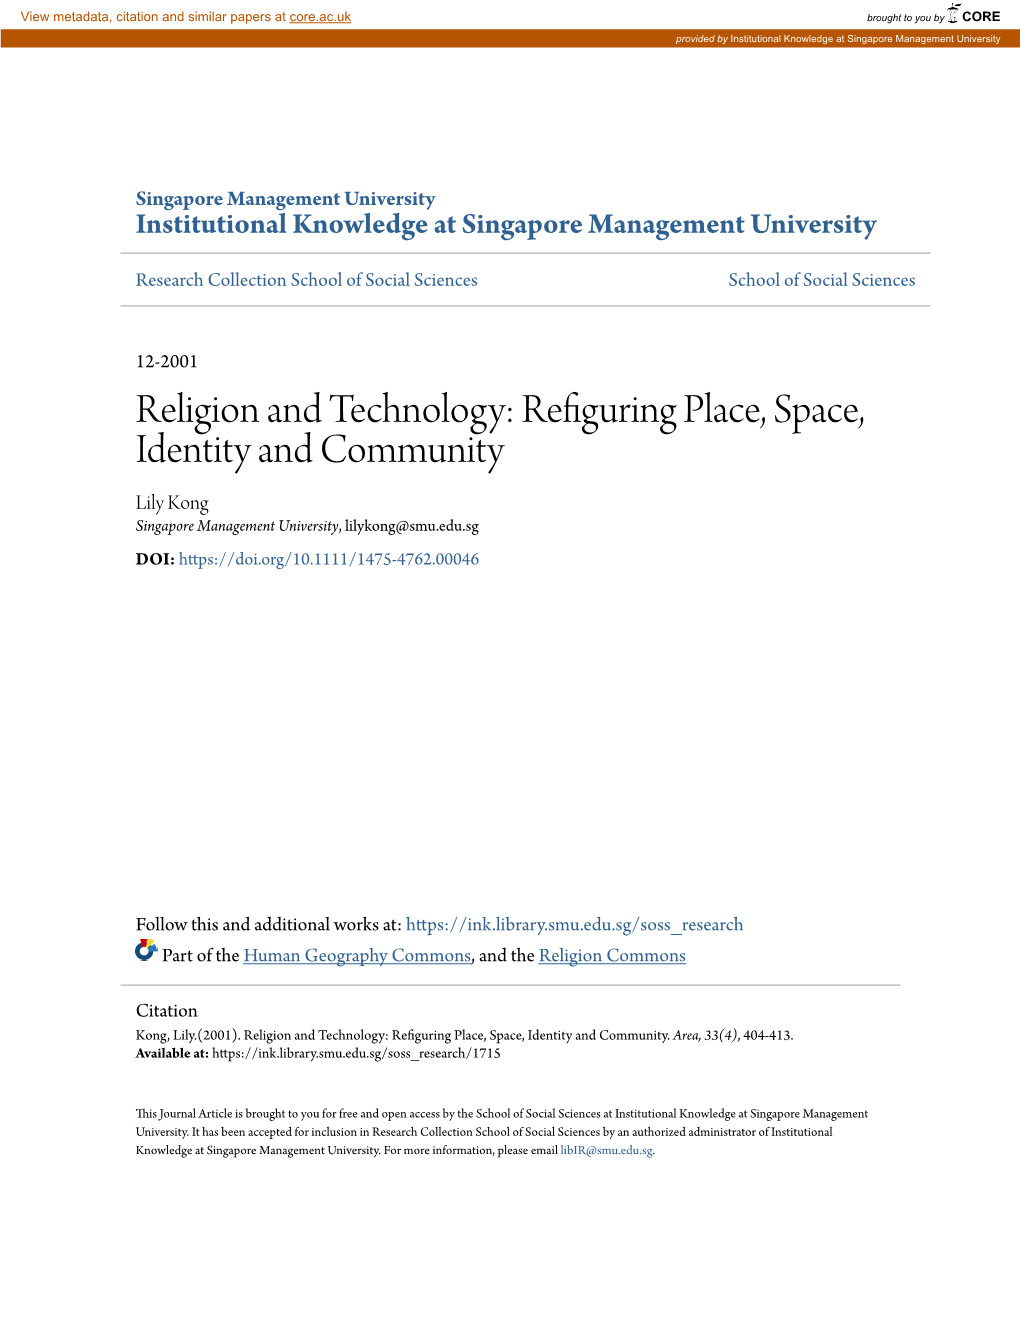 Religion and Technology: Refiguring Place, Space, Identity And